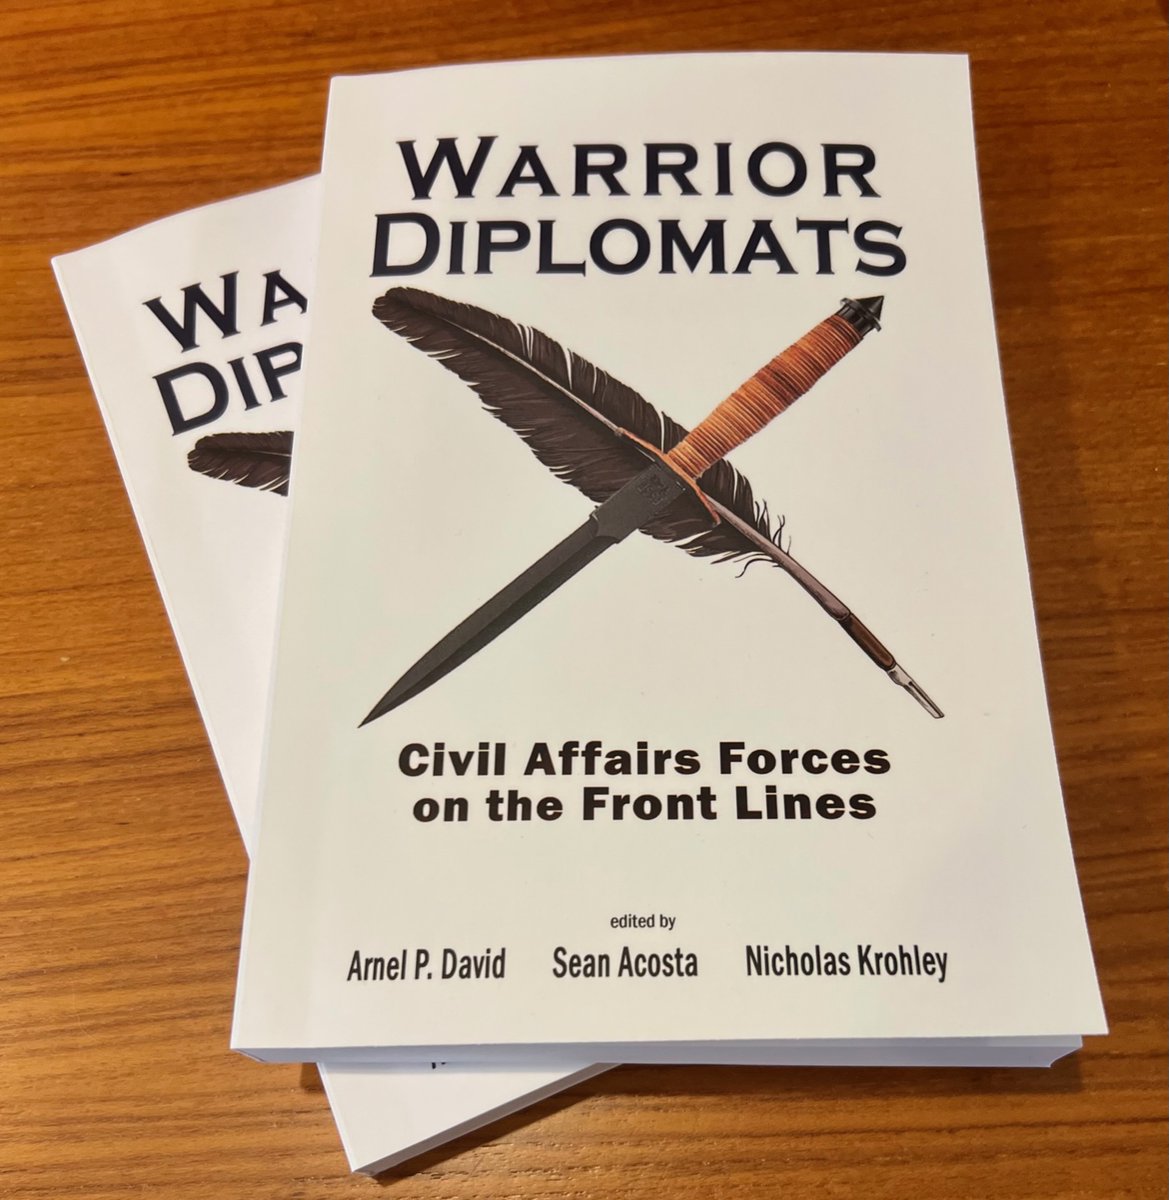 Really proud to get this book complete through @CambriaPress with @Sean_A_Acosta and @Nkrohley. Contributing authors @james_micciche, @atwellkyle from @IrregWarfare, and  other practitioners, to include some amazing NCOs, allies, and civilian scholars. #StrongDiversity #CA